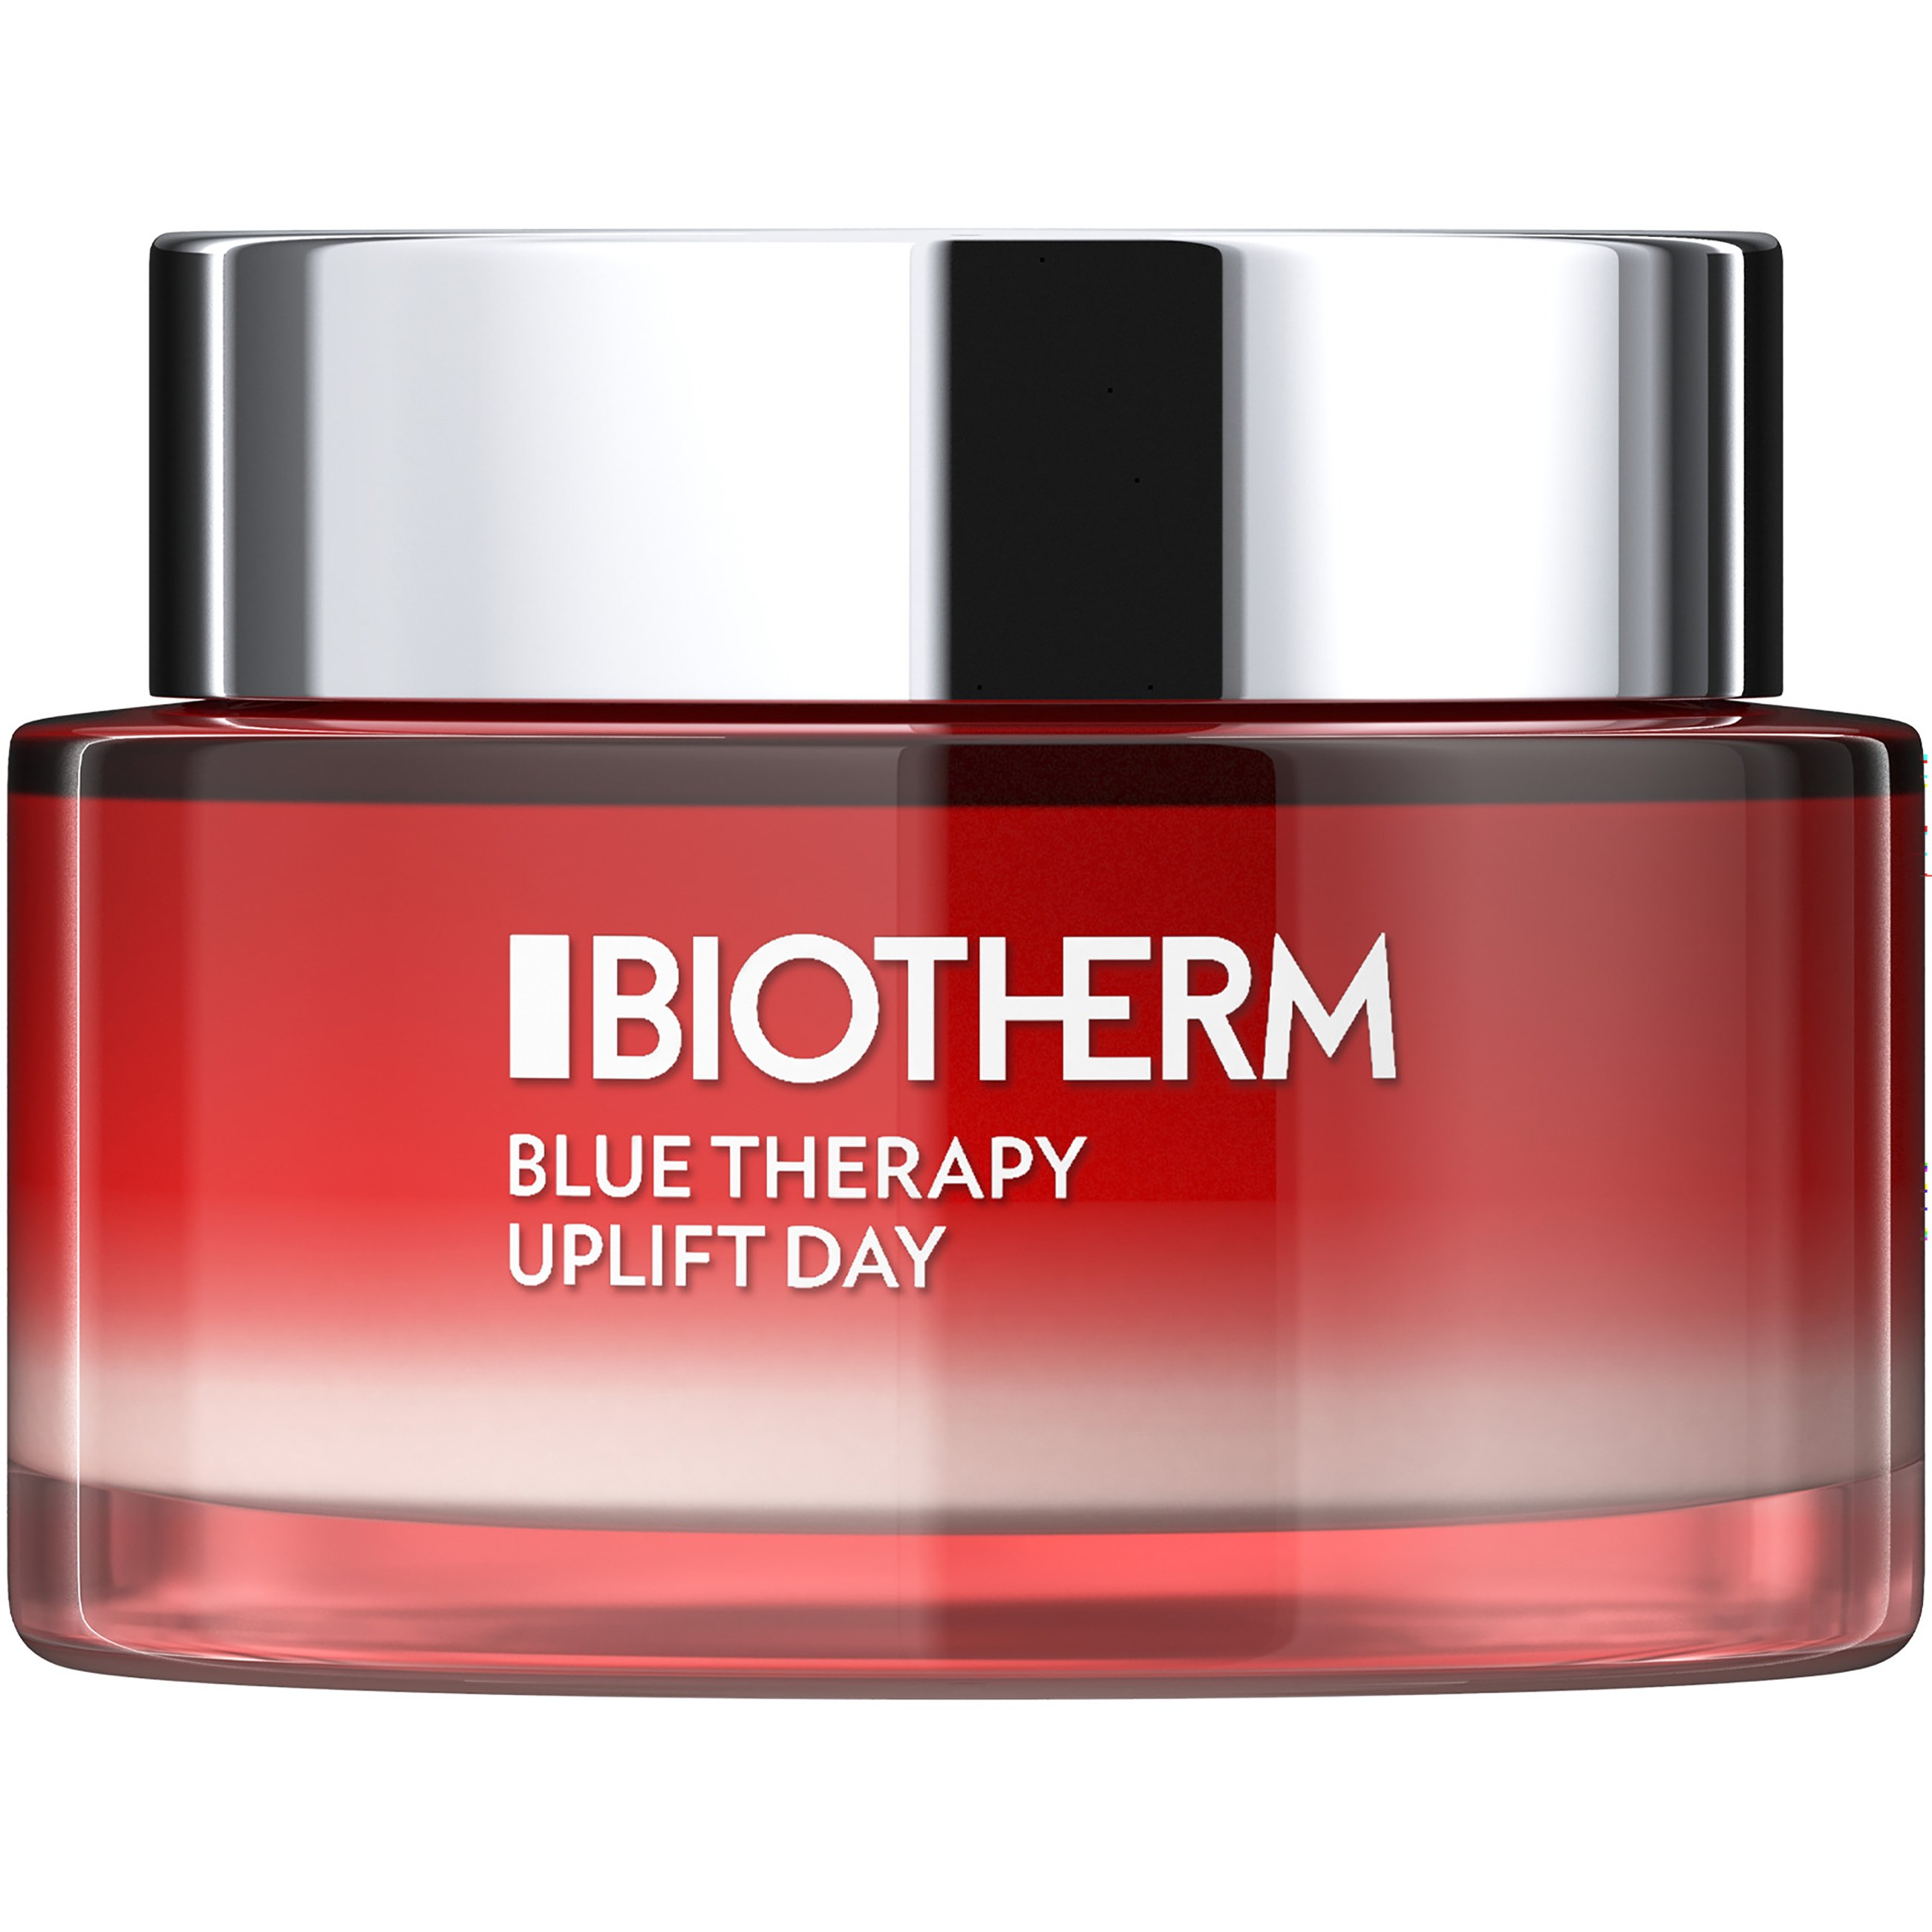 Biotherm Blue Therapy Red Algae Uplift 75 ml